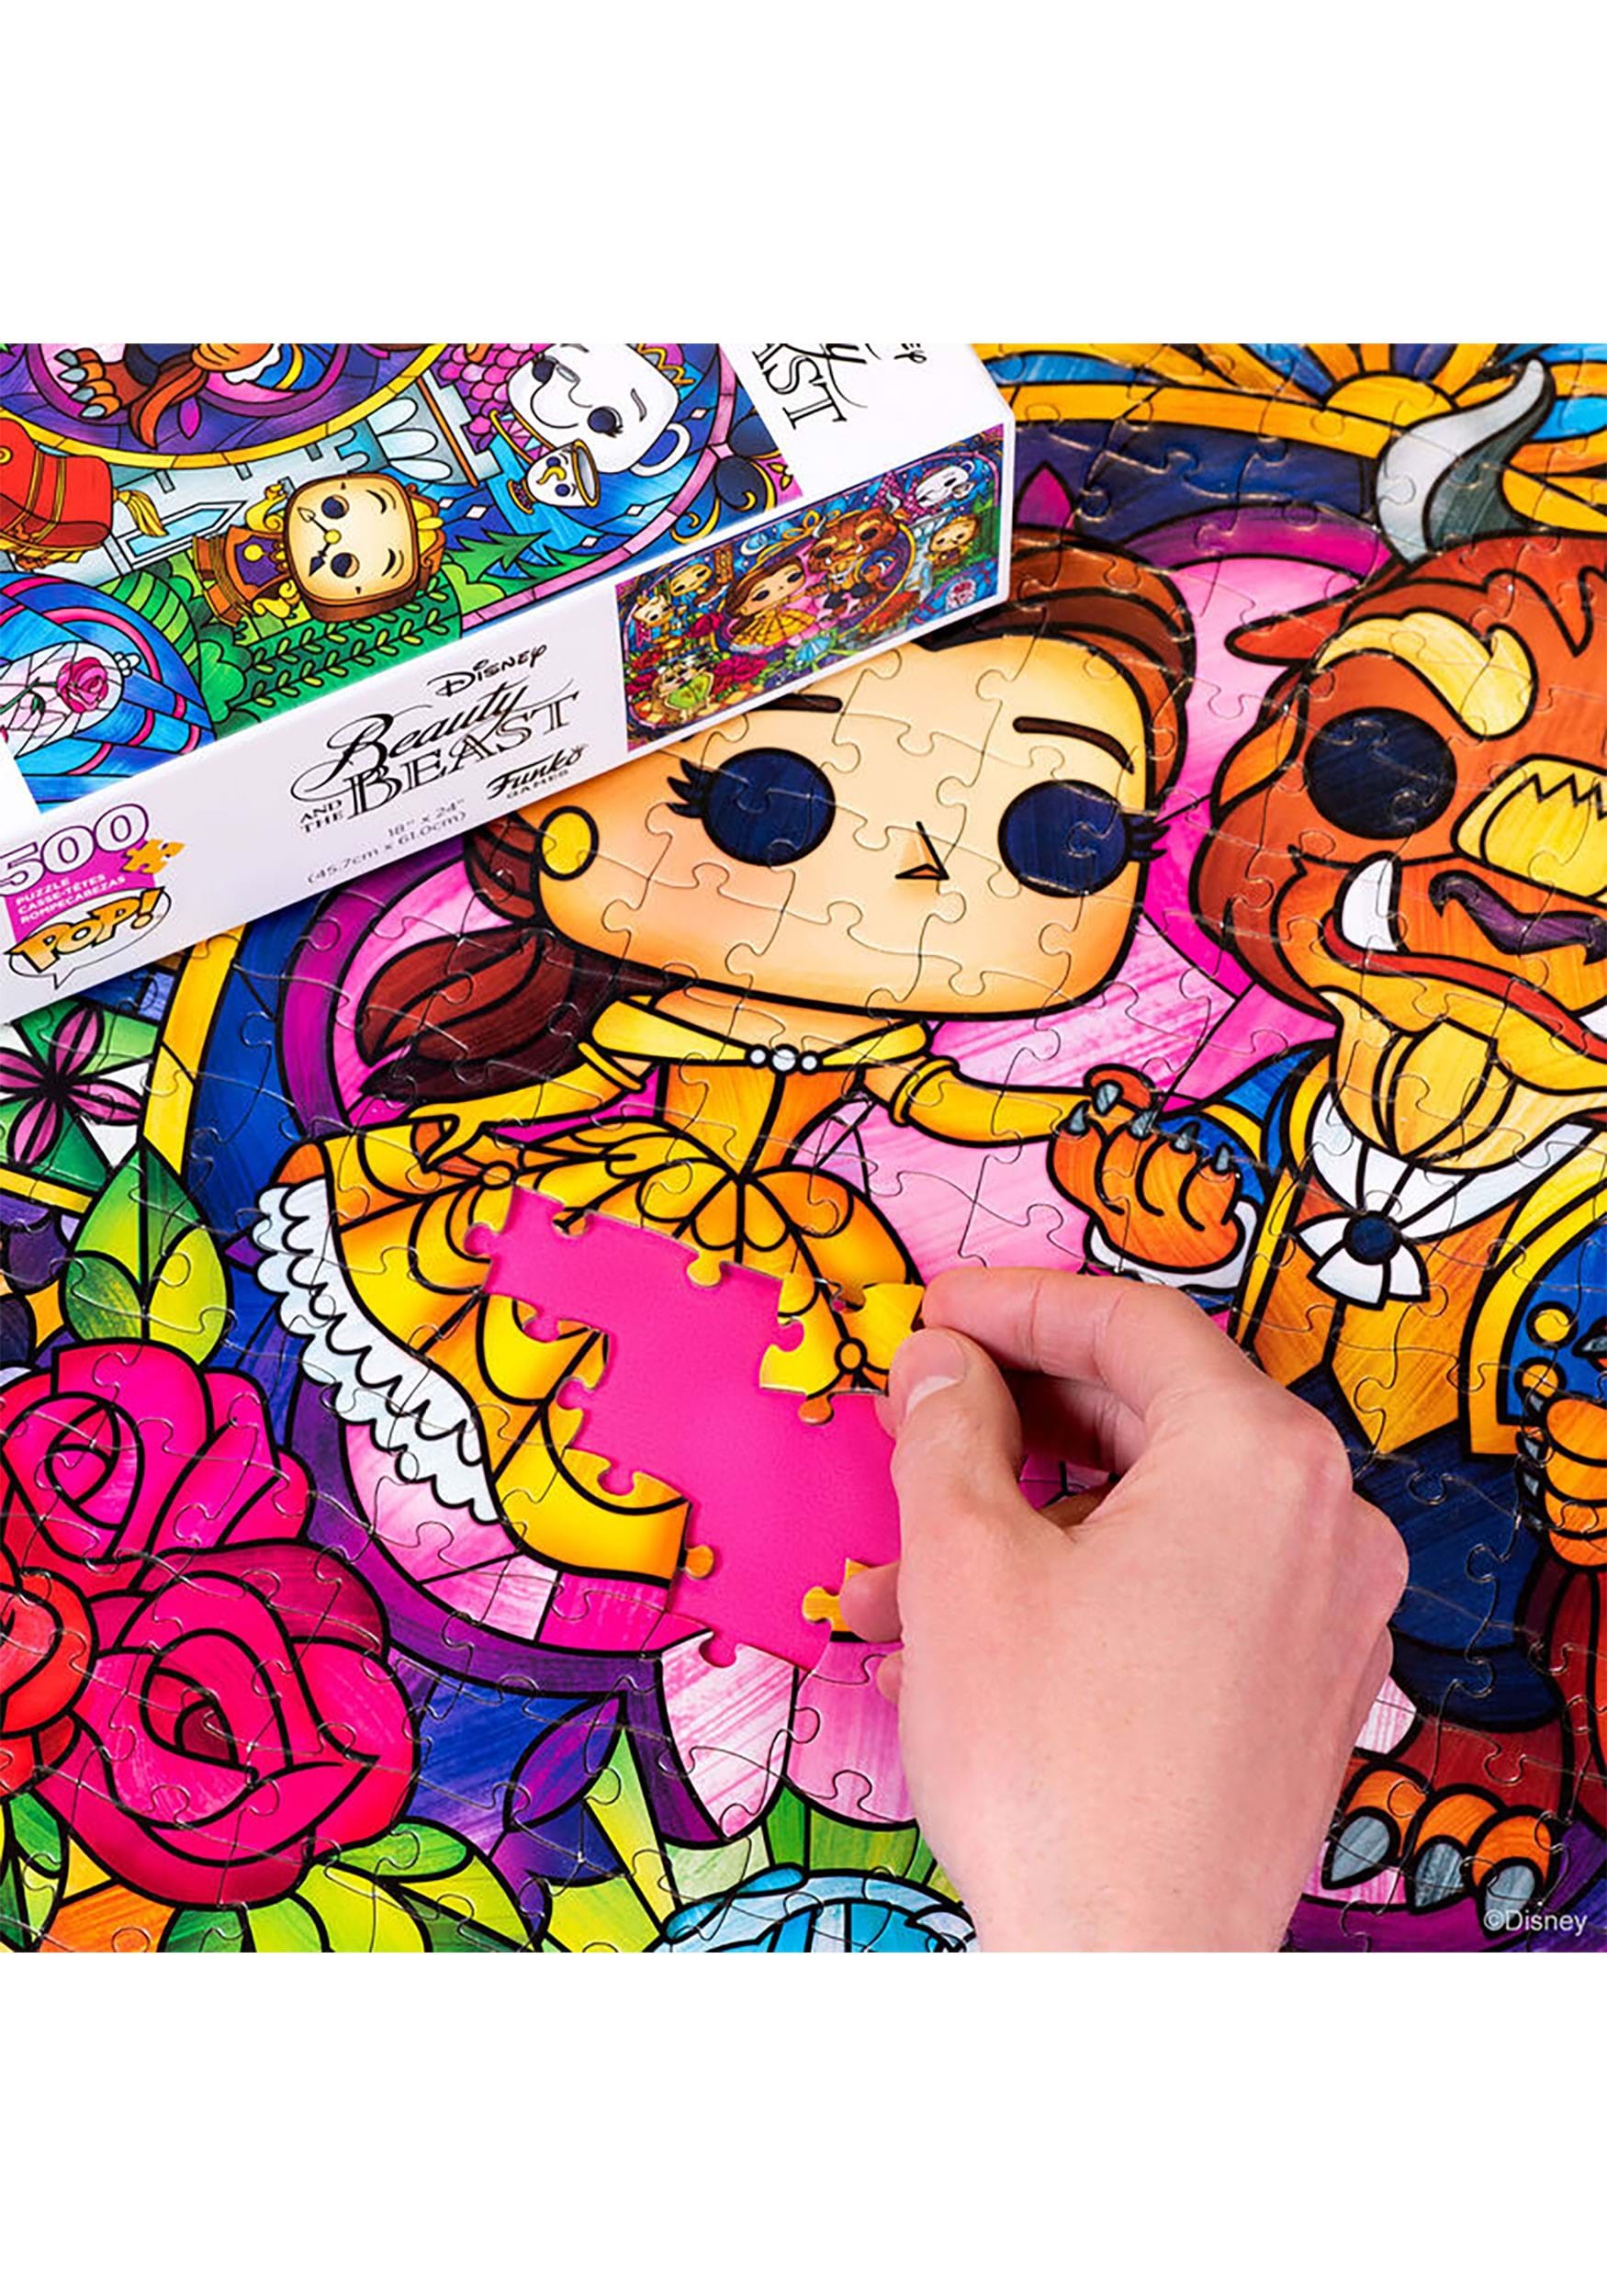 Funko POP! Disney Beauty And The Beast 500 Piece Puzzle